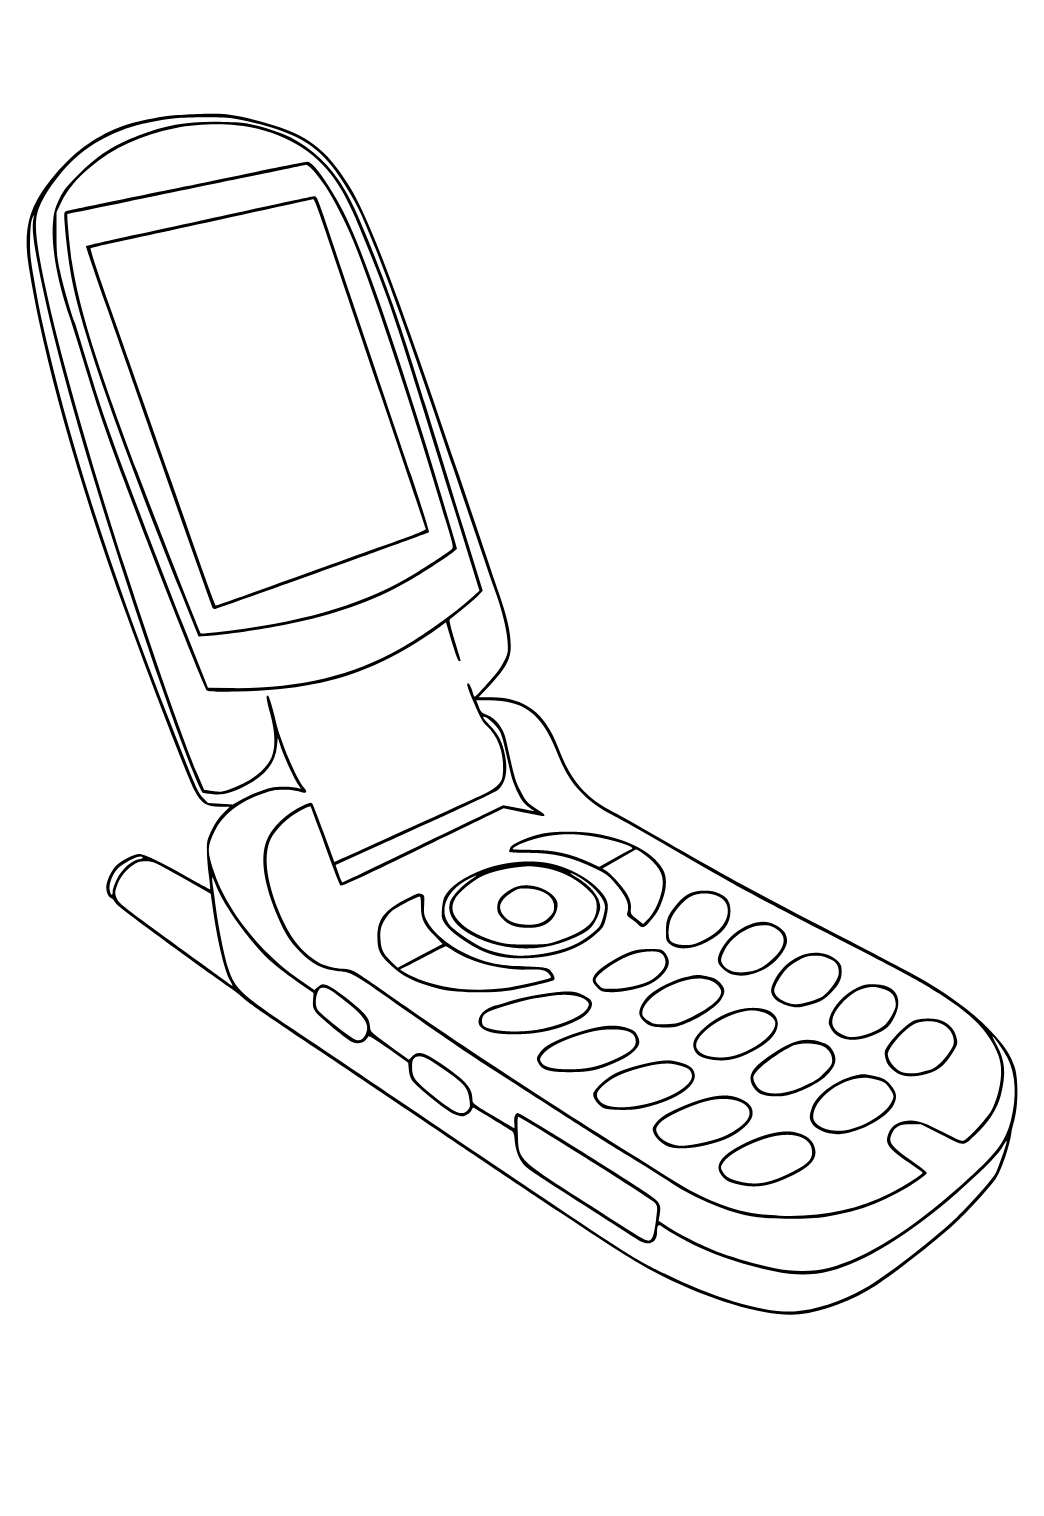 Free printable phone old coloring page for adults and kids